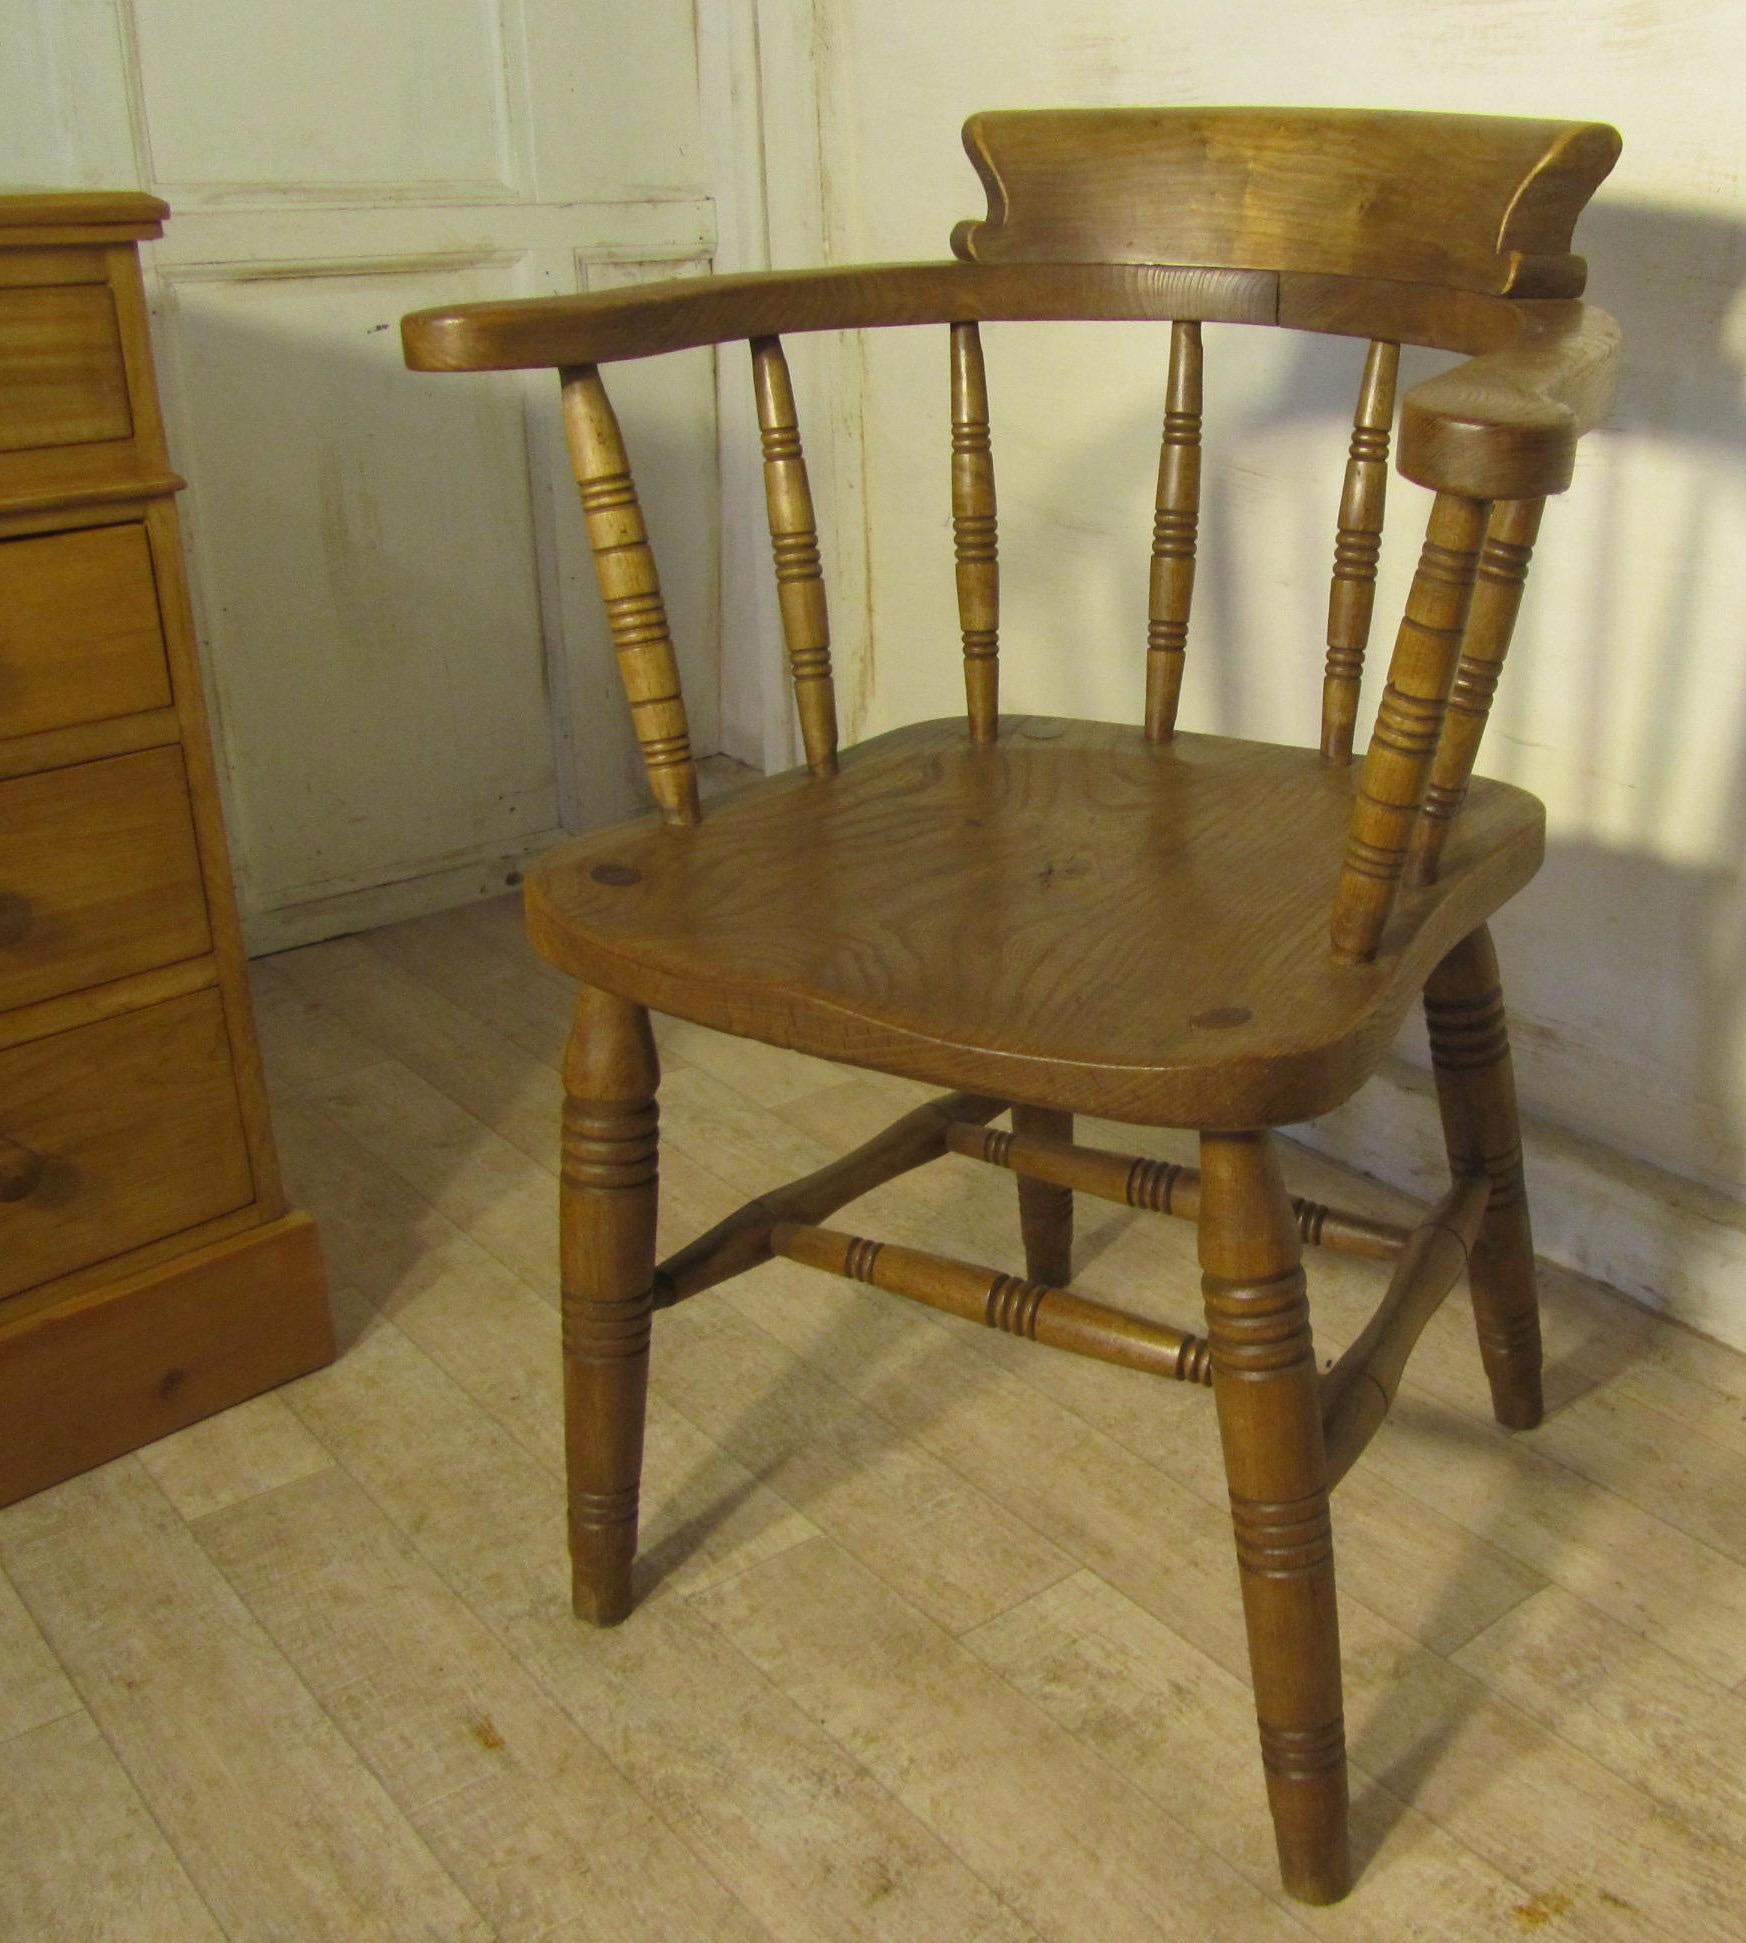 Beech and Elm Smokers Bow Office or Desk Chair

This solid Beech and Elm chair has an attractive curving back with a very wide curved top rail and turned spindles beneath 

The chair stands on sturdy turned legs and has been kept in good sound